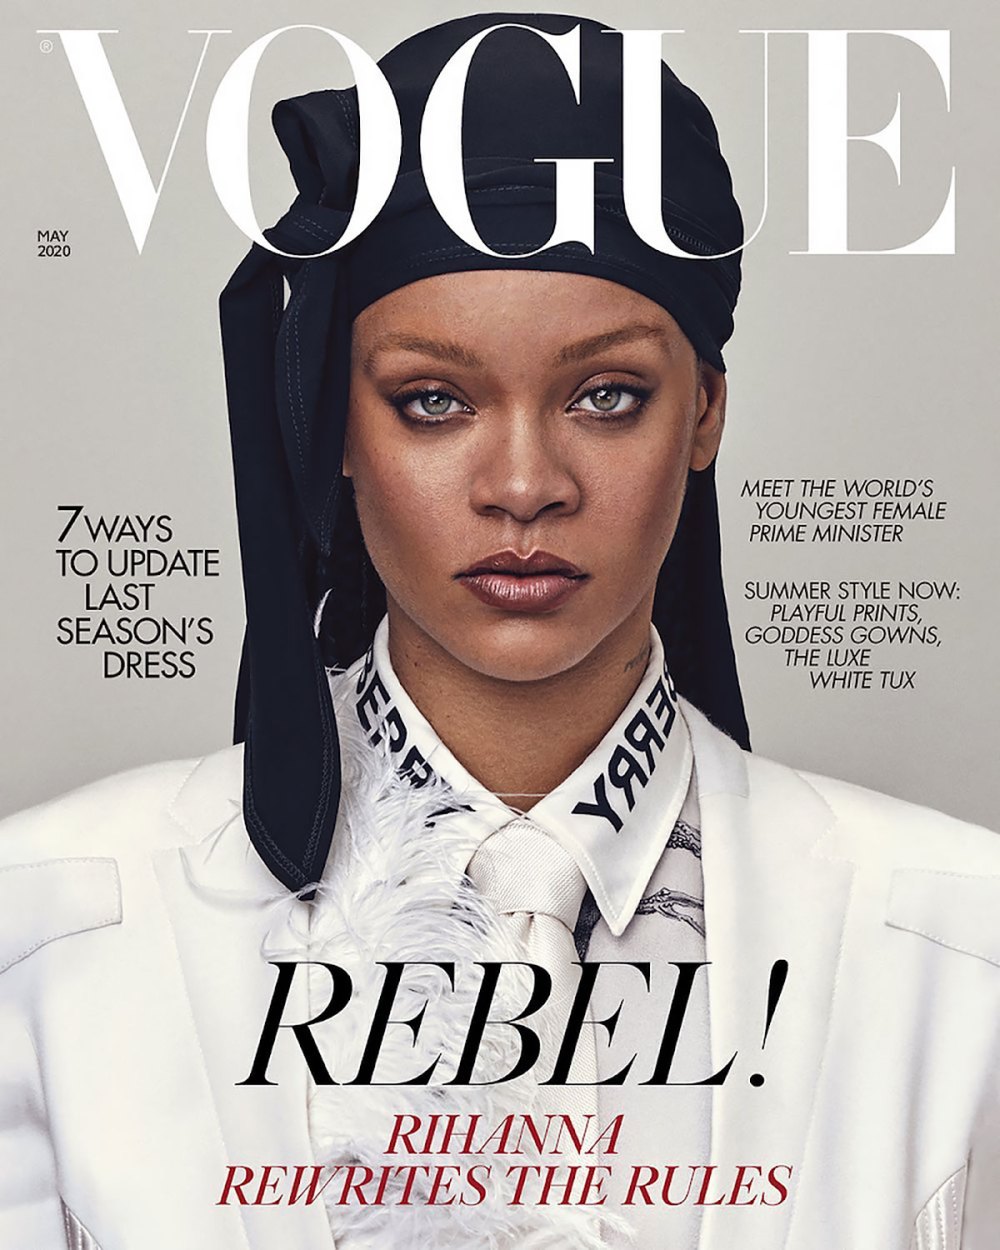 See How Rihanna Just Made History on the May 2020 'British Vogue' Cover